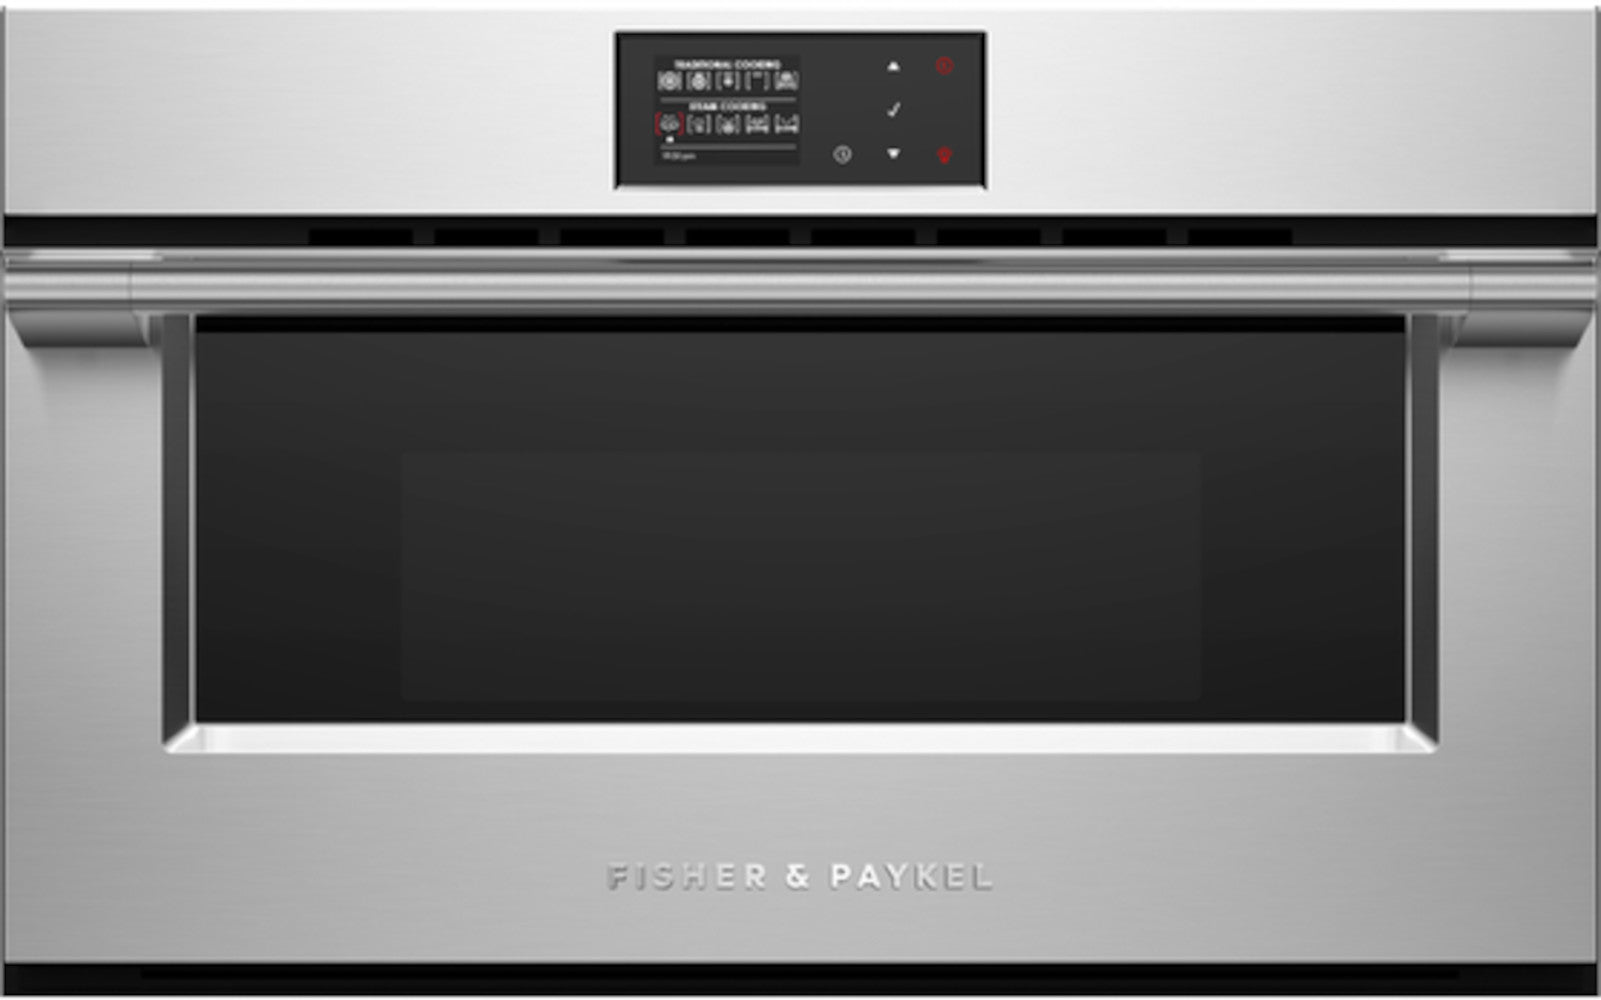 Fisher & Paykel - 1.3 cu. ft Steam Wall Oven in Stainless - OS30NPX1